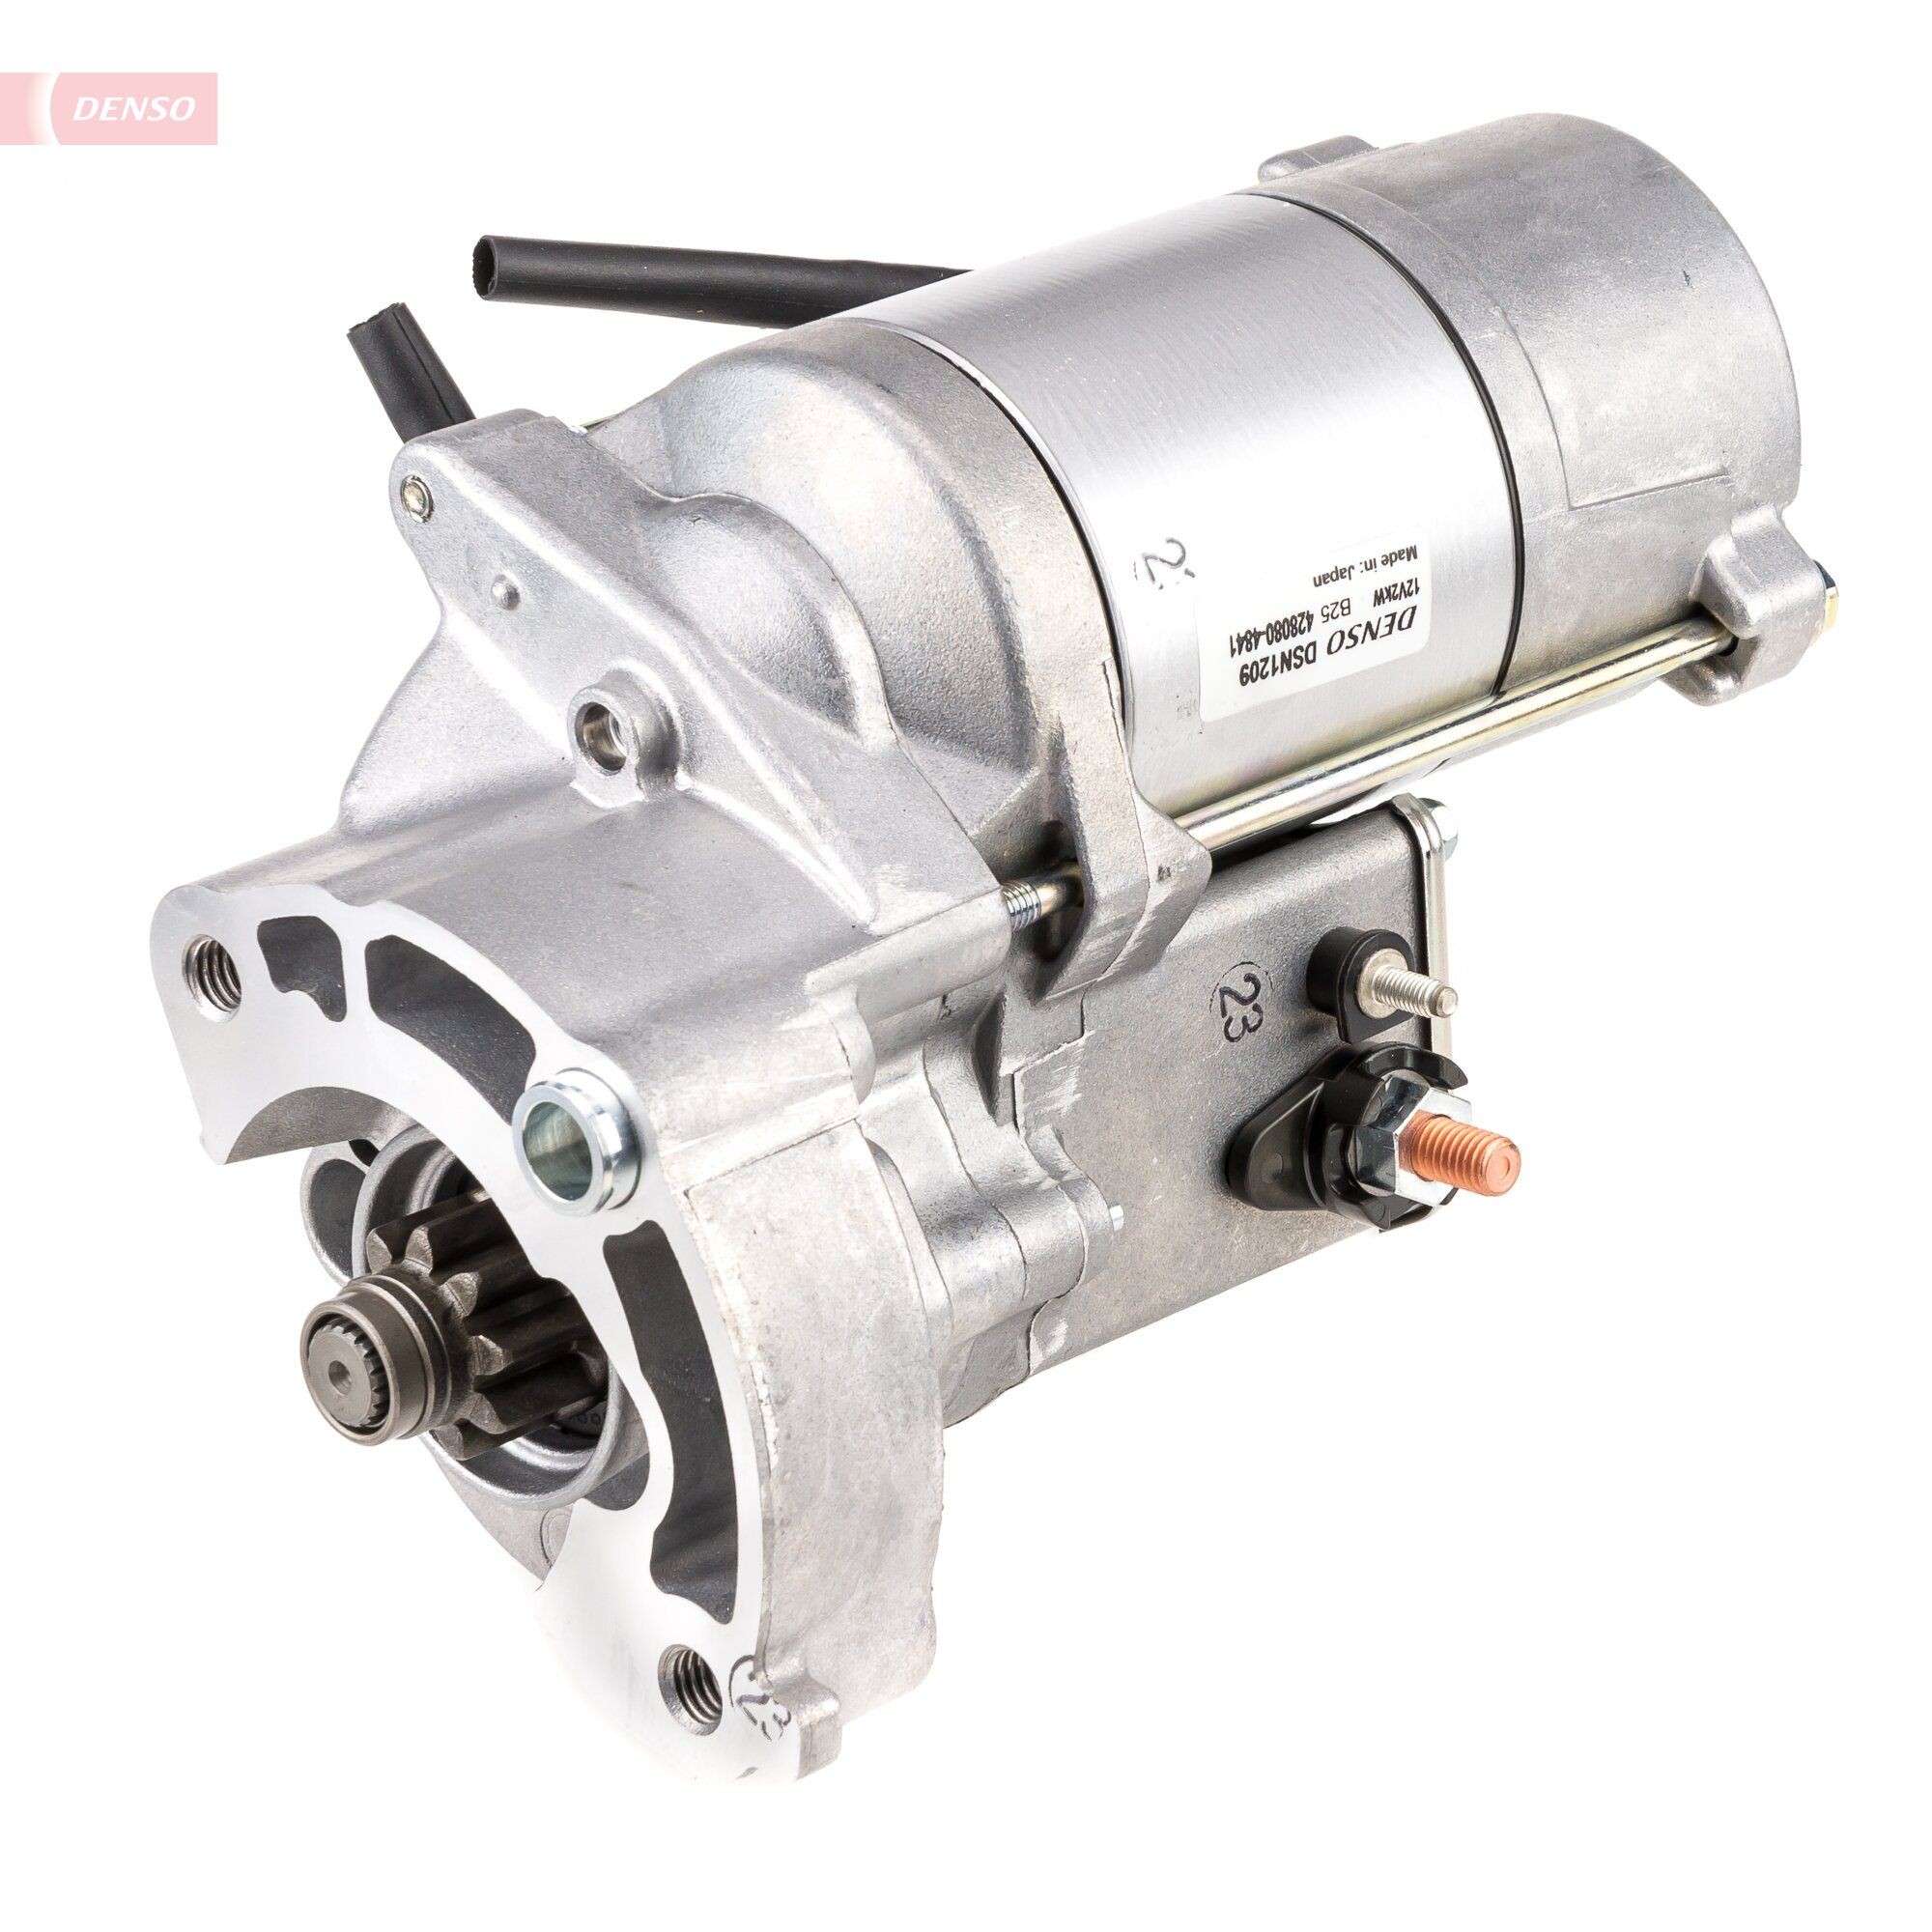 DENSO DSN1209 Starter motor LAND ROVER experience and price